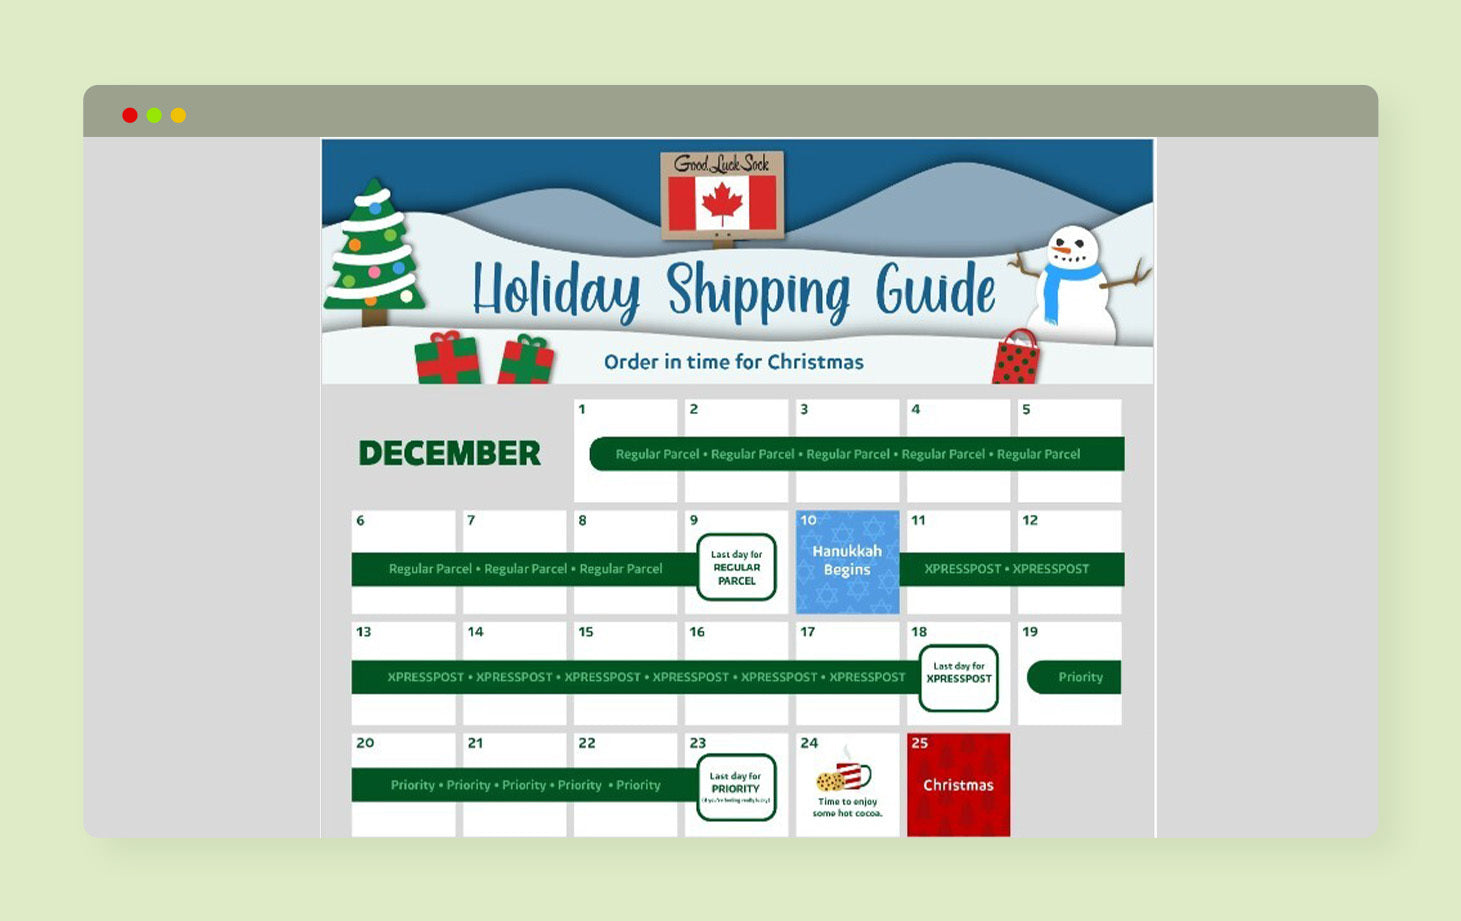 Shopify Checkout Customization Tips for Holiday Season Success - Offer Delivery Date Picking Options - Shopify Checkout Customization : 11 Tips To Craft a Seamless Holiday Experience 1. Infuse Festive Branding